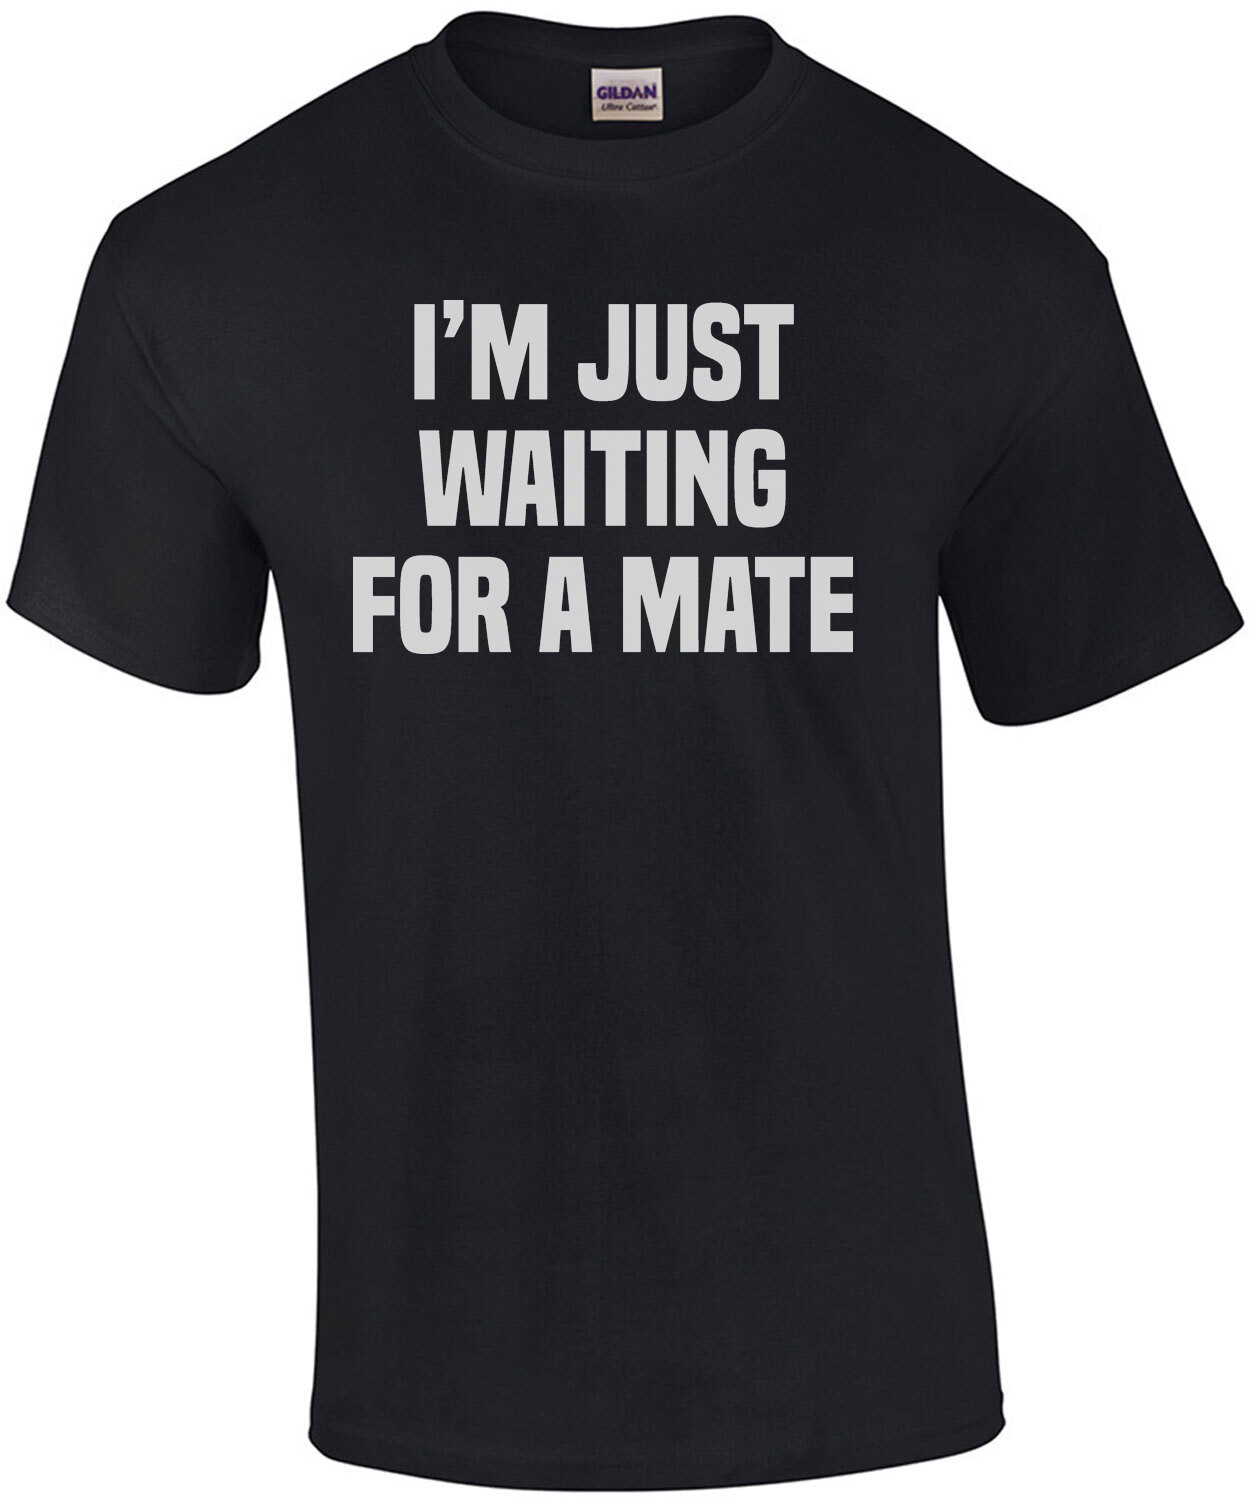 I'm just waiting for a mate - funny t-shirt